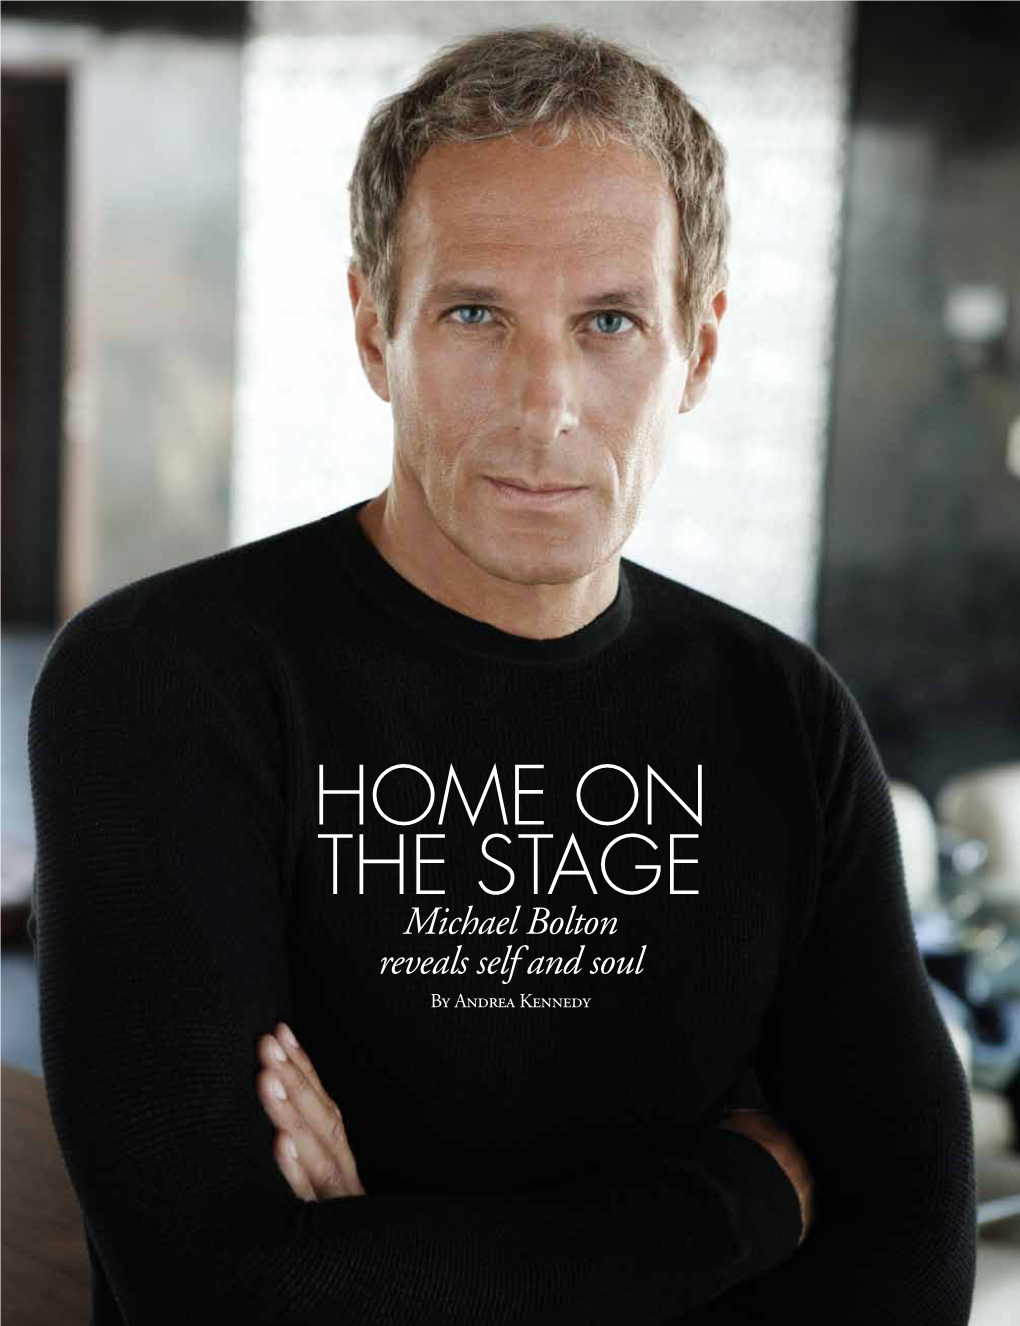 Michael Bolton Reveals Self and Soul by Andrea Kennedy